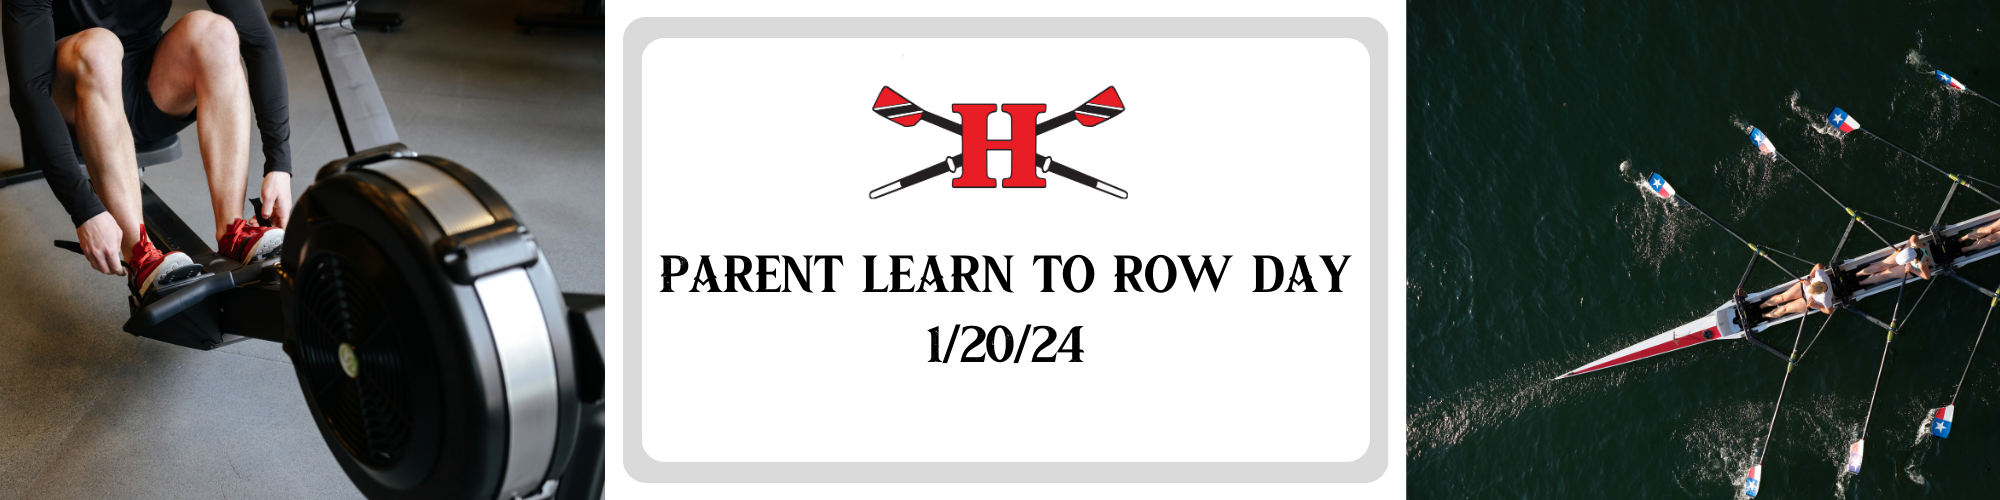 Parent learn to row day 12024